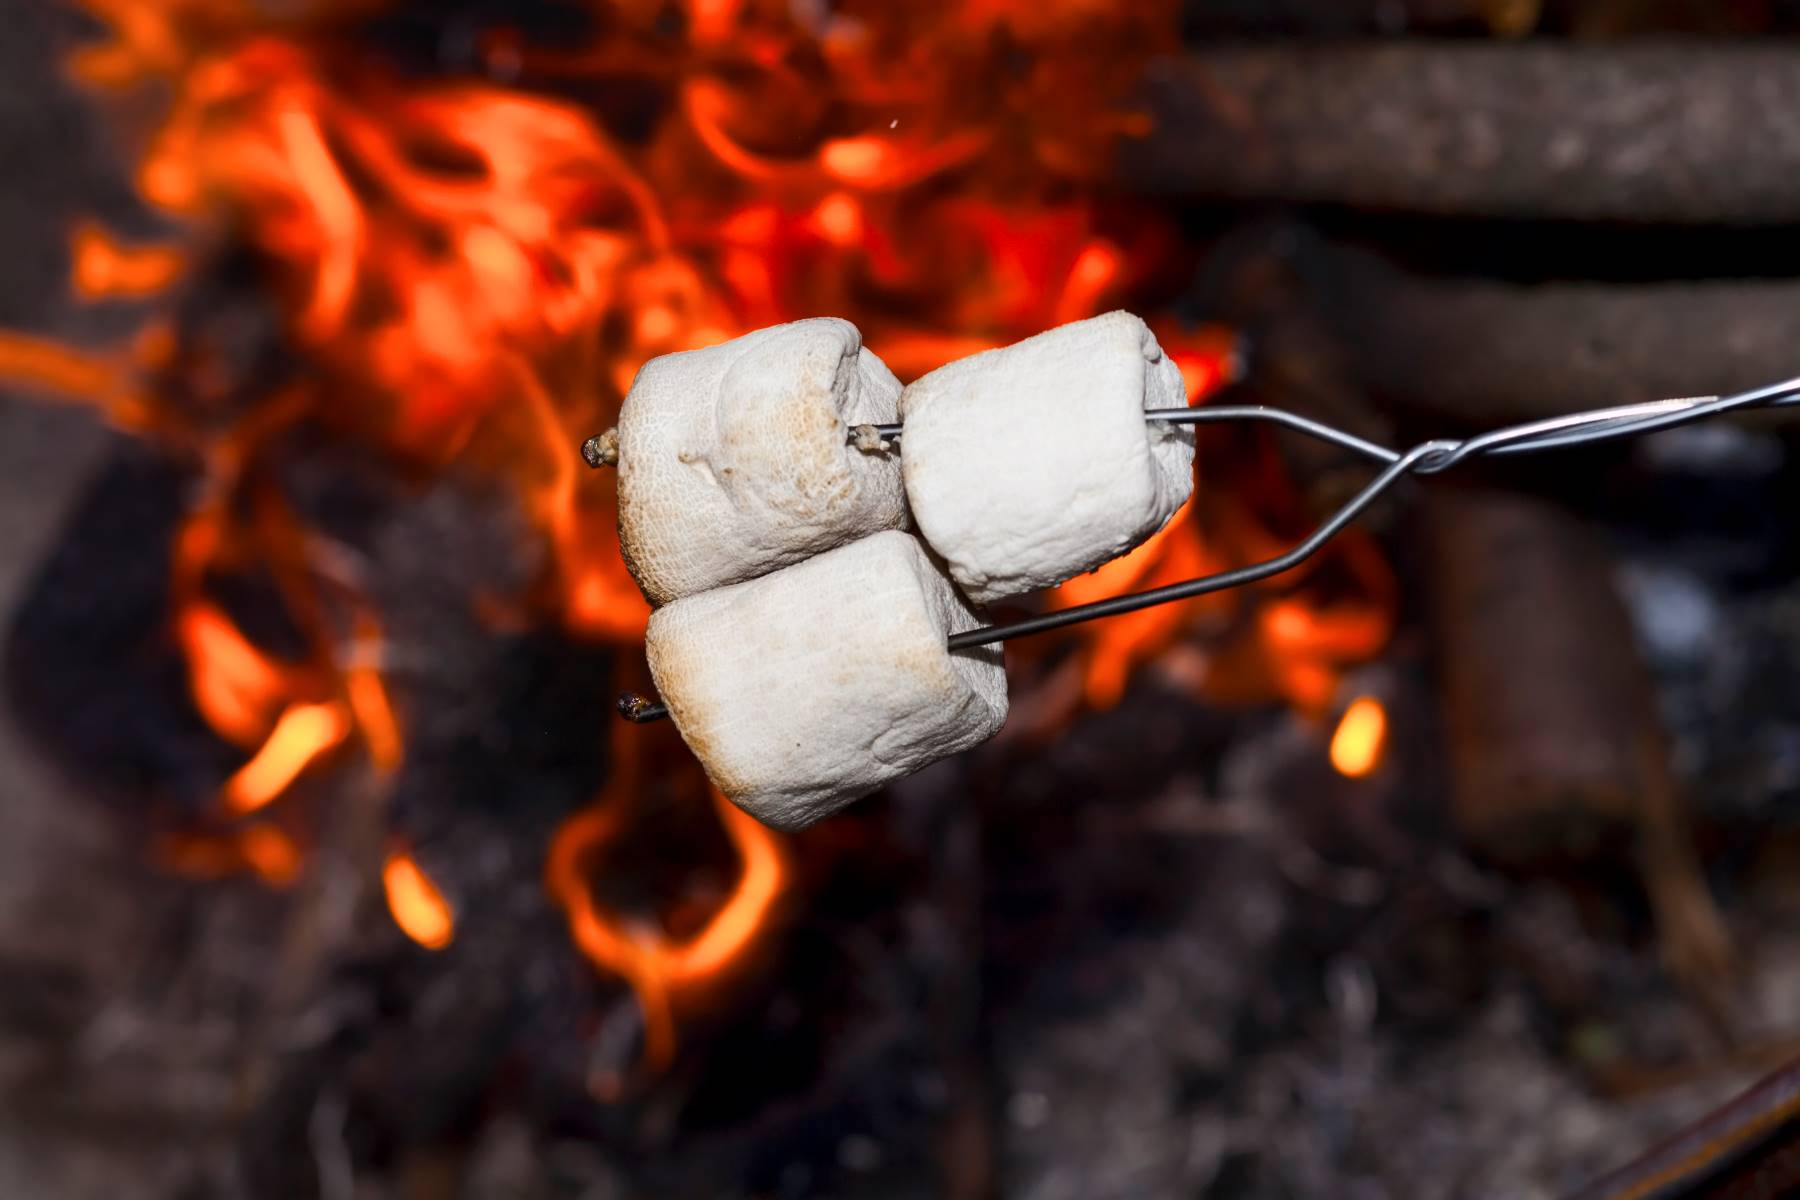 Marshmallows roasting over an open fire while camping